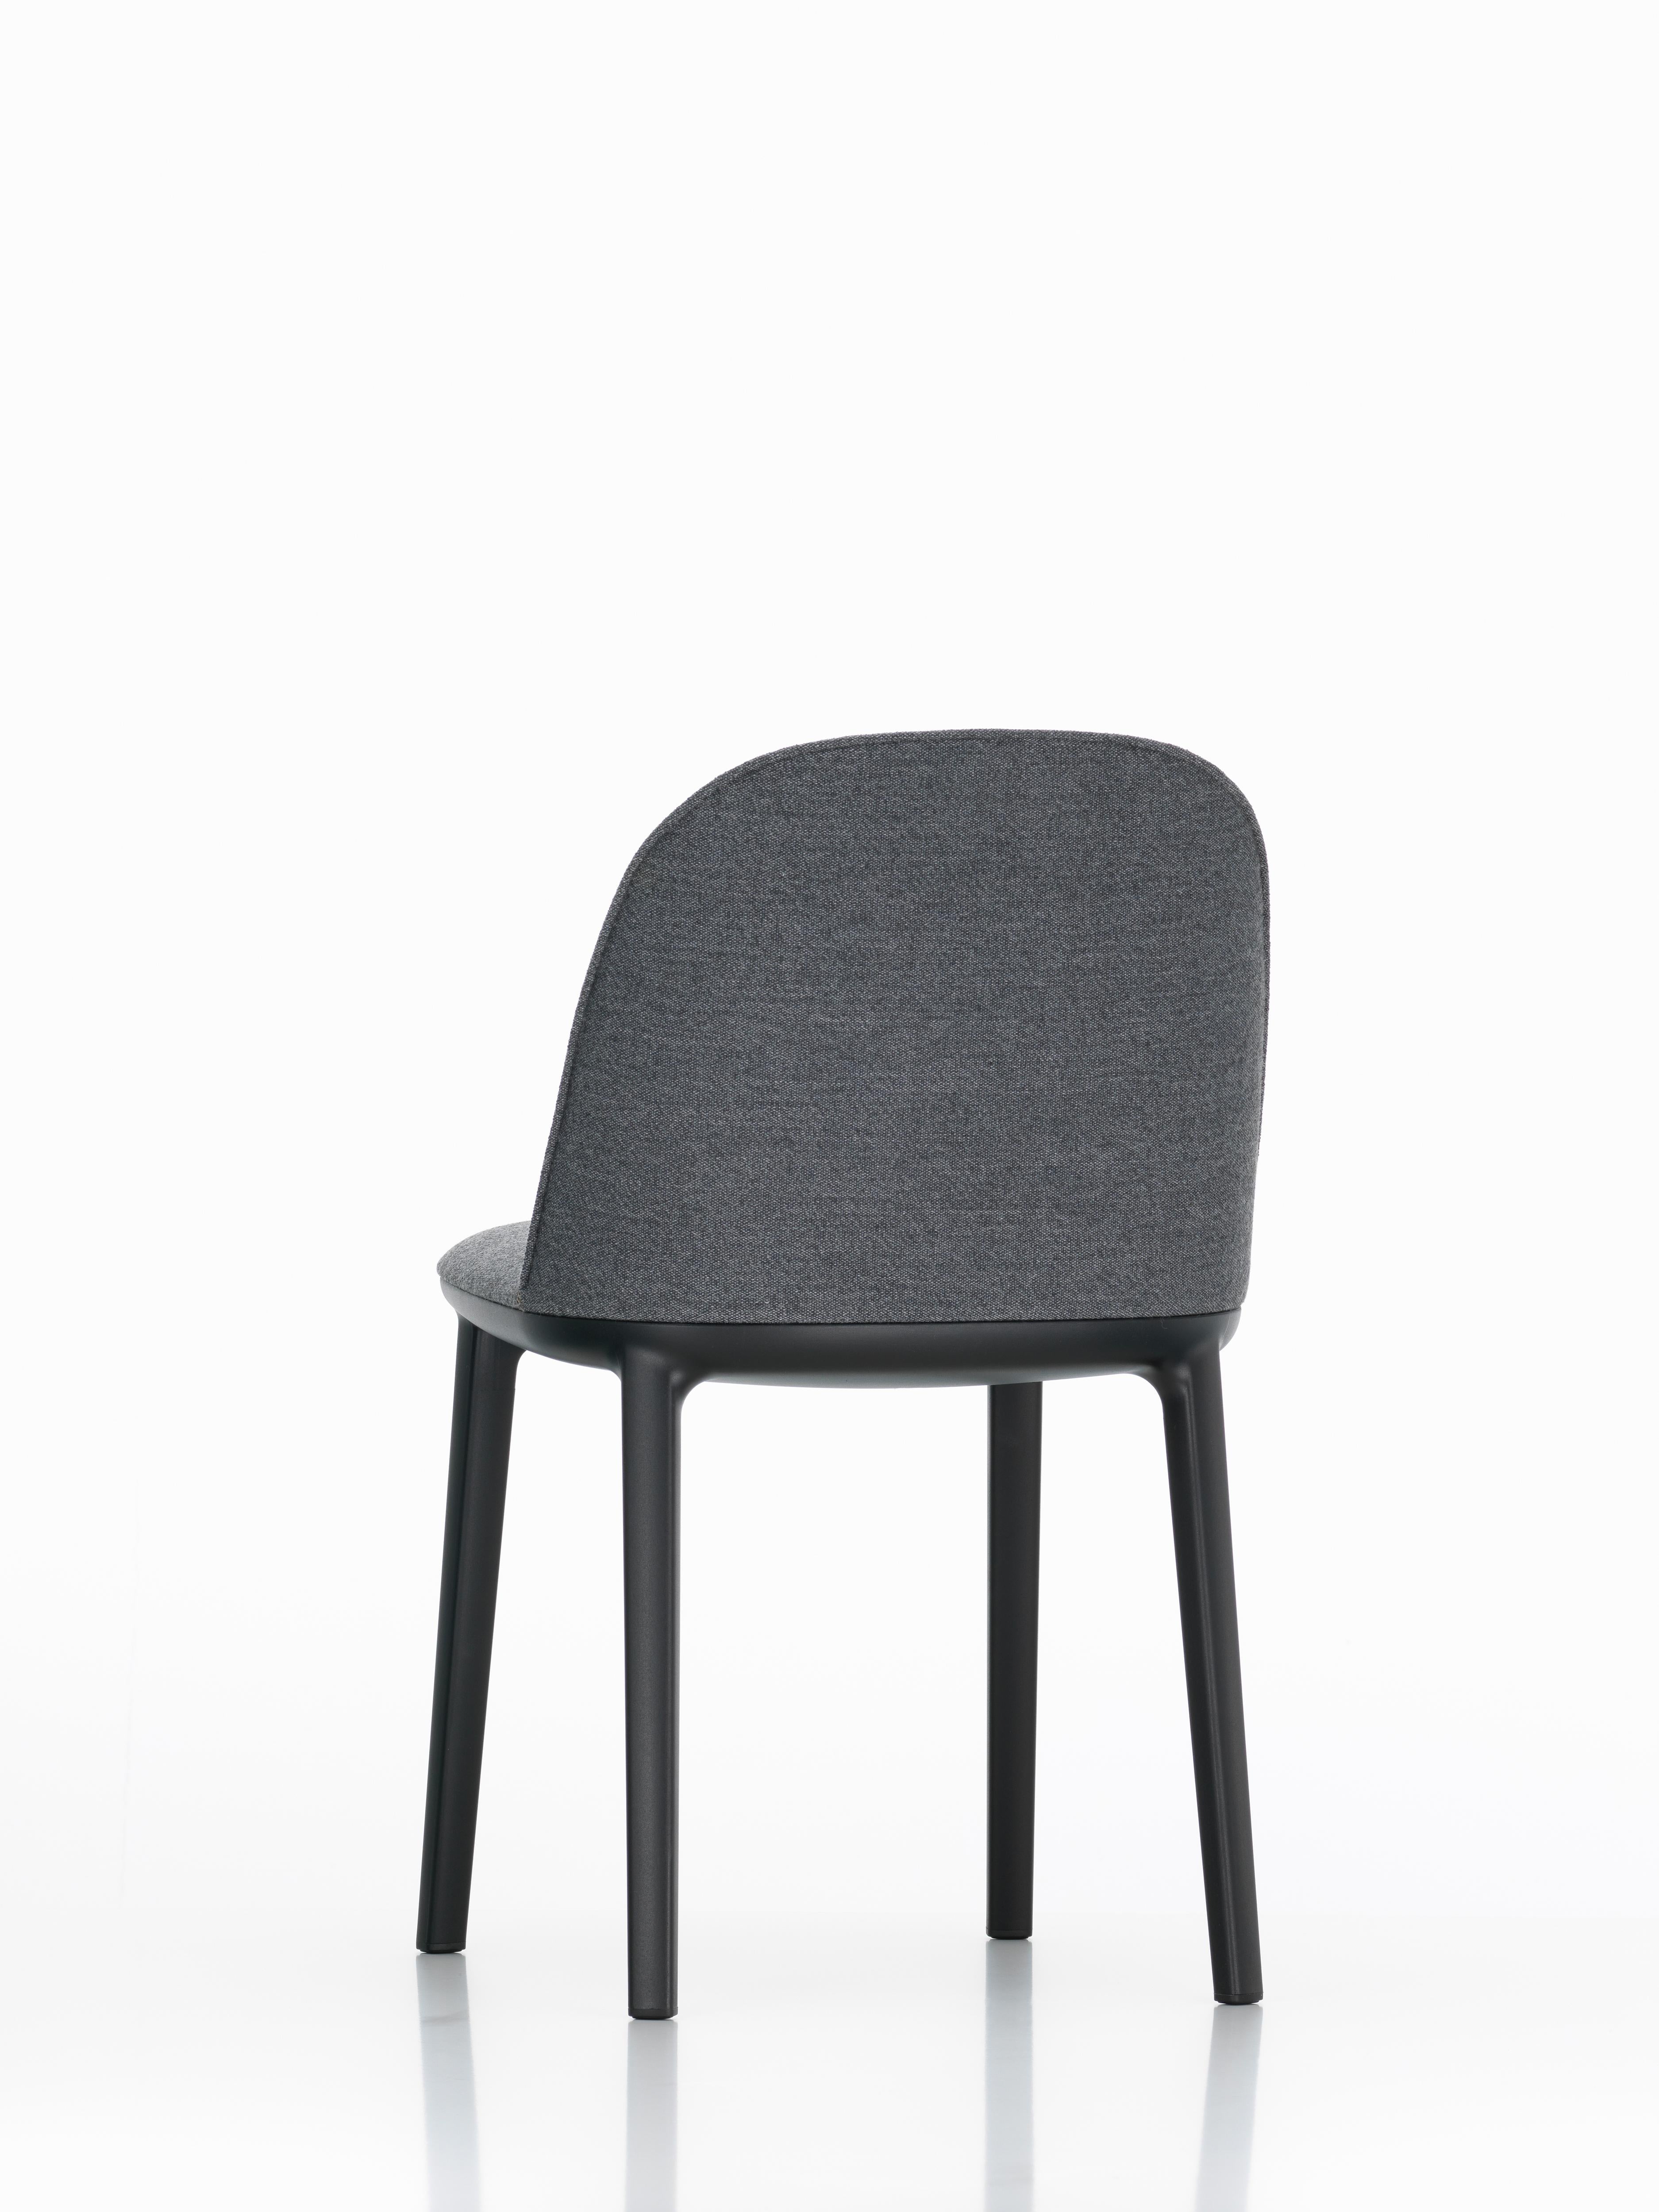 Vitra Softshell Side Chair in Dark Grey Plano by Ronan & Erwan Bouroullec In New Condition For Sale In New York, NY